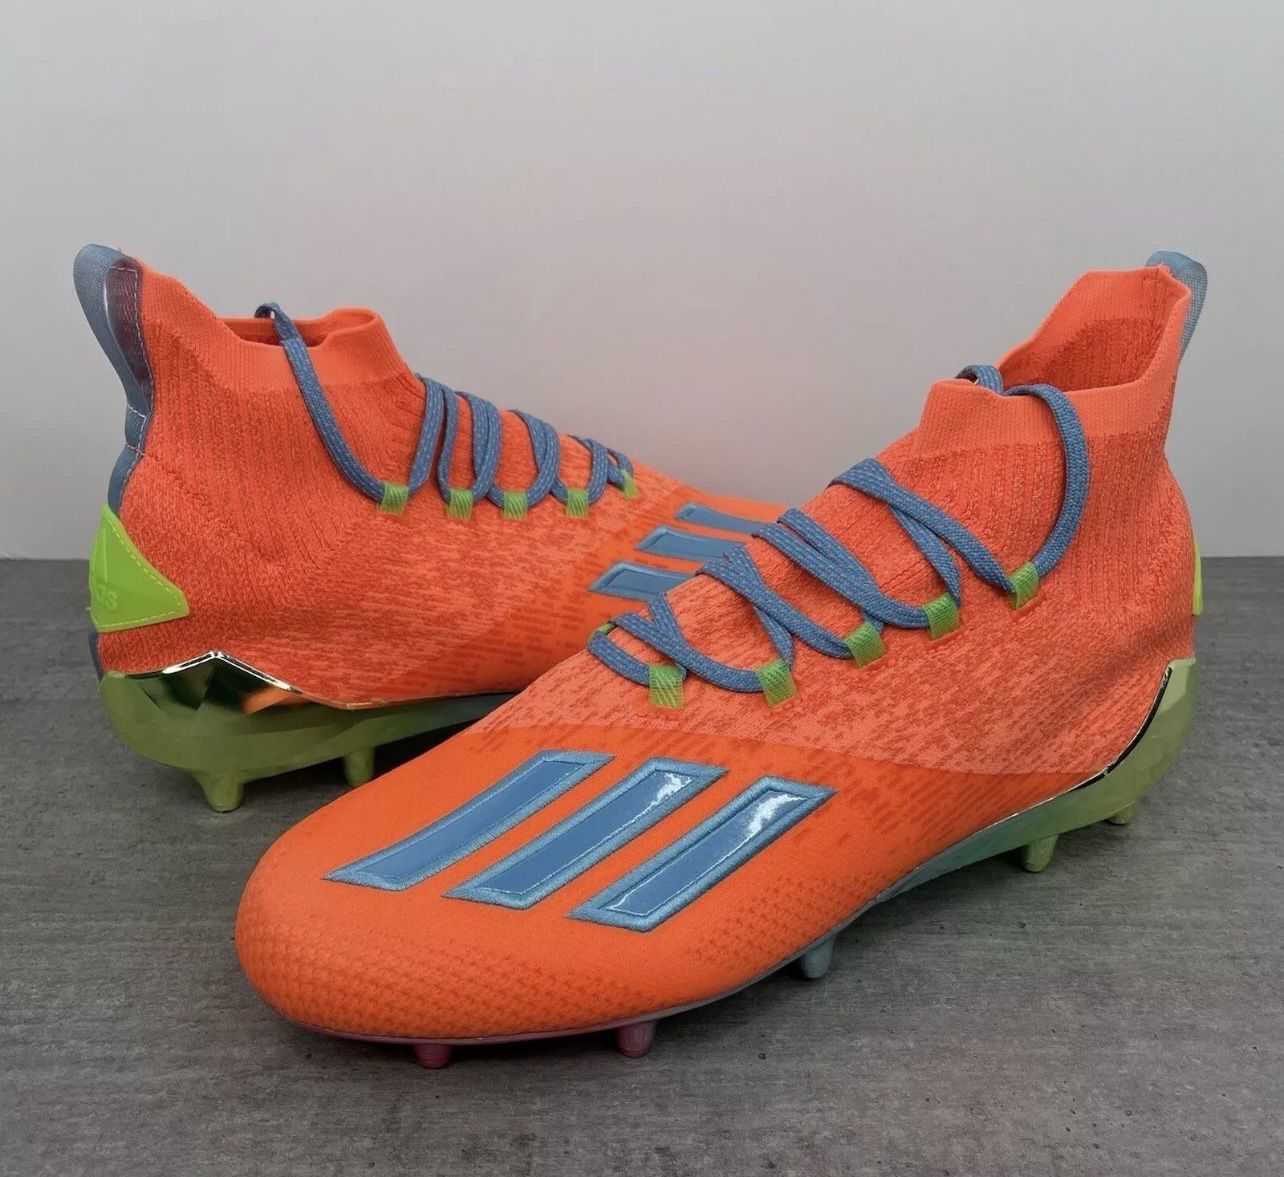 Adidas Adizero Primeknit Cleats Coral/Cyan/Green EH2518 Men's Size 13 for Sale in CA OfferUp